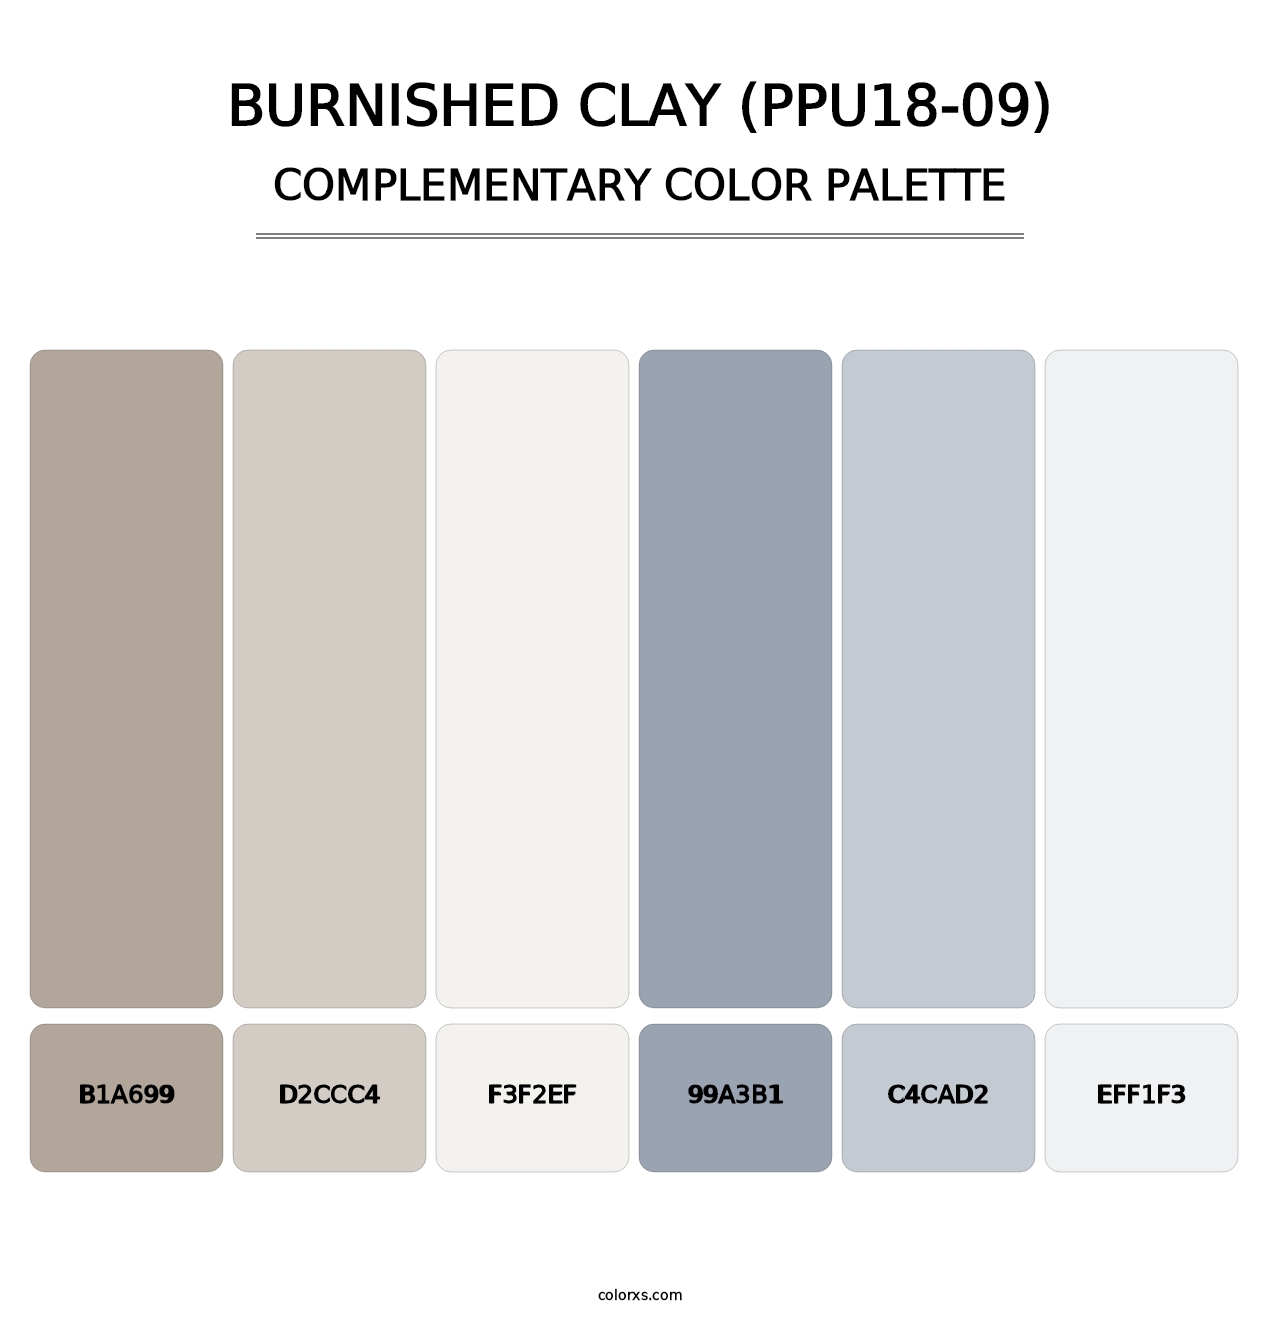 Burnished Clay (PPU18-09) - Complementary Color Palette